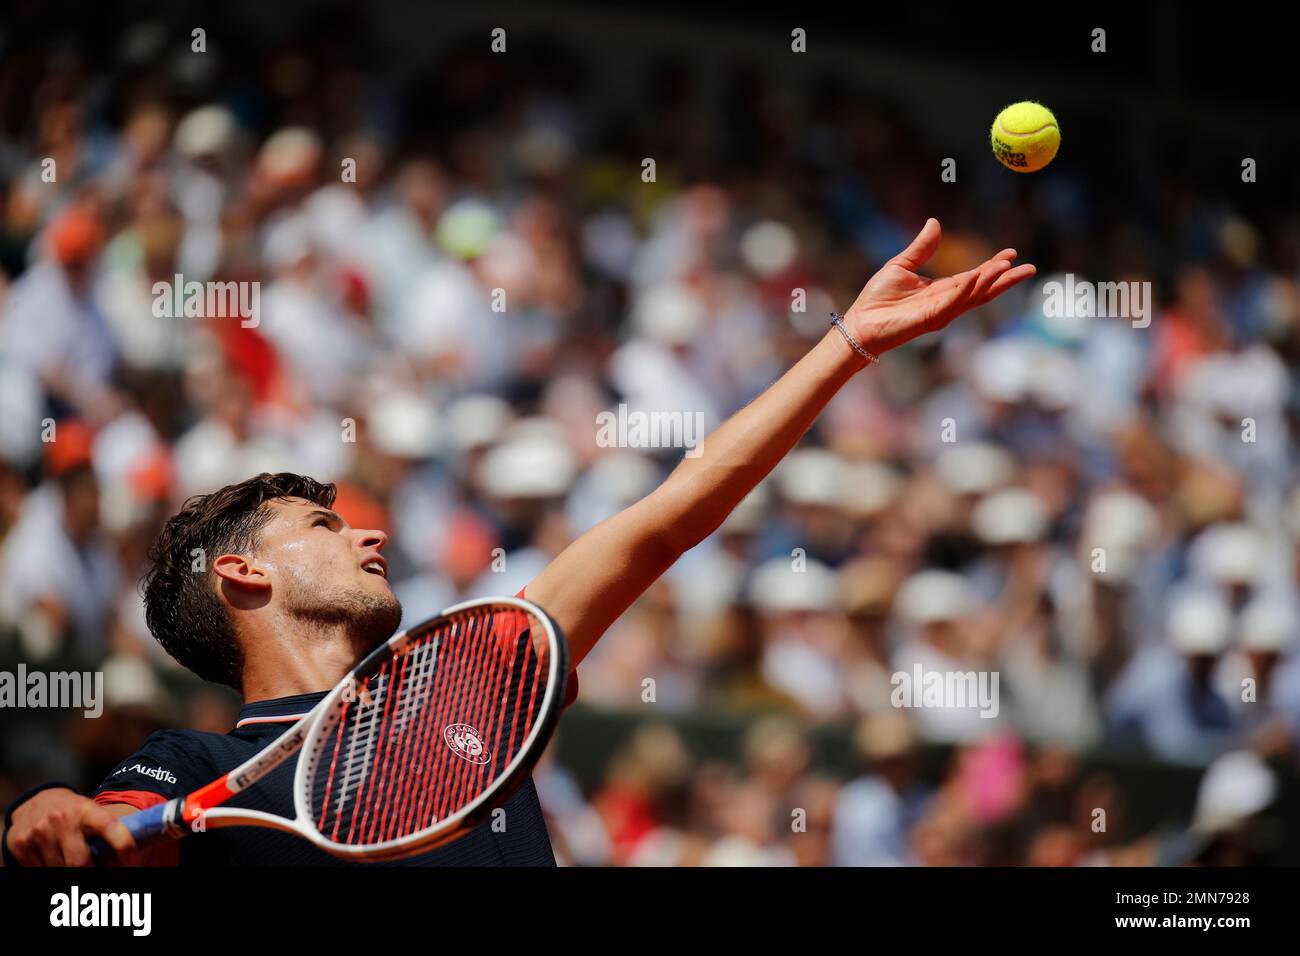 Austrias Dominic Thiem serves against Italys Marco Cecchinato during their semifinal match of the French Open tennis tournament at the Roland Garros stadium in Paris, France, Friday, June 8, 2018